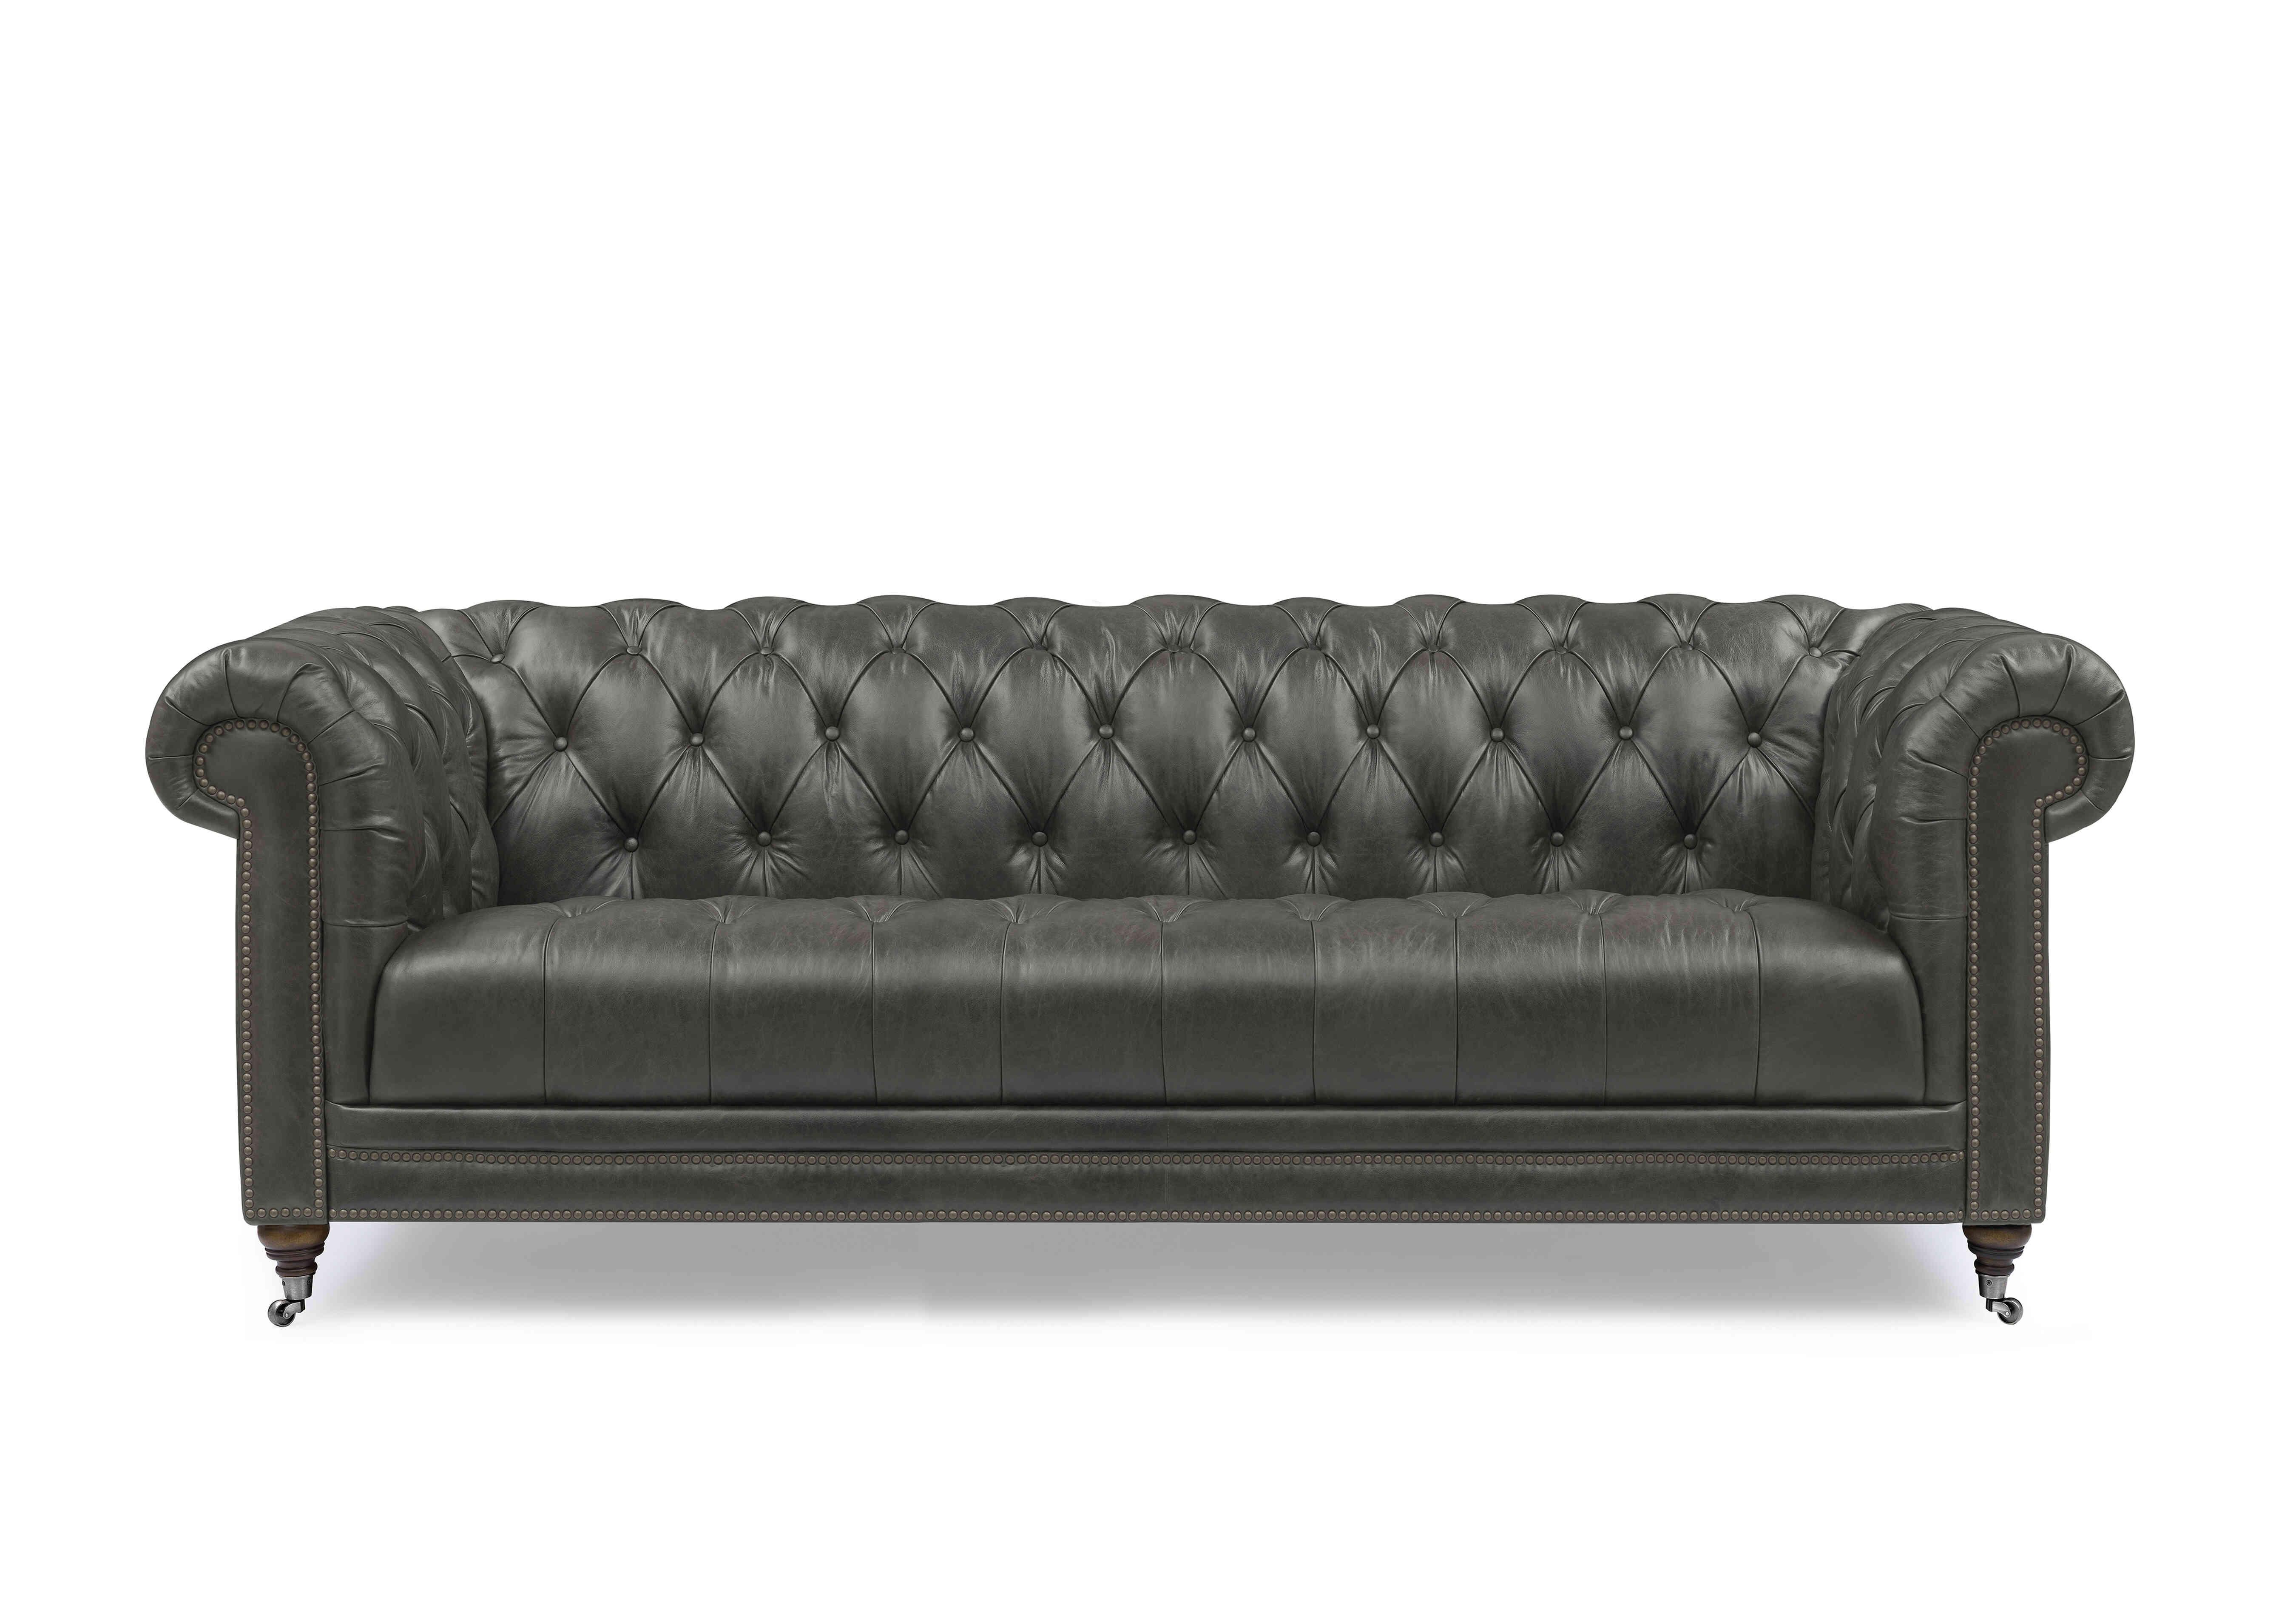 Walter 4 Seater Leather Chesterfield Sofa with USB-C in X3y2-1966ls Granite on Furniture Village